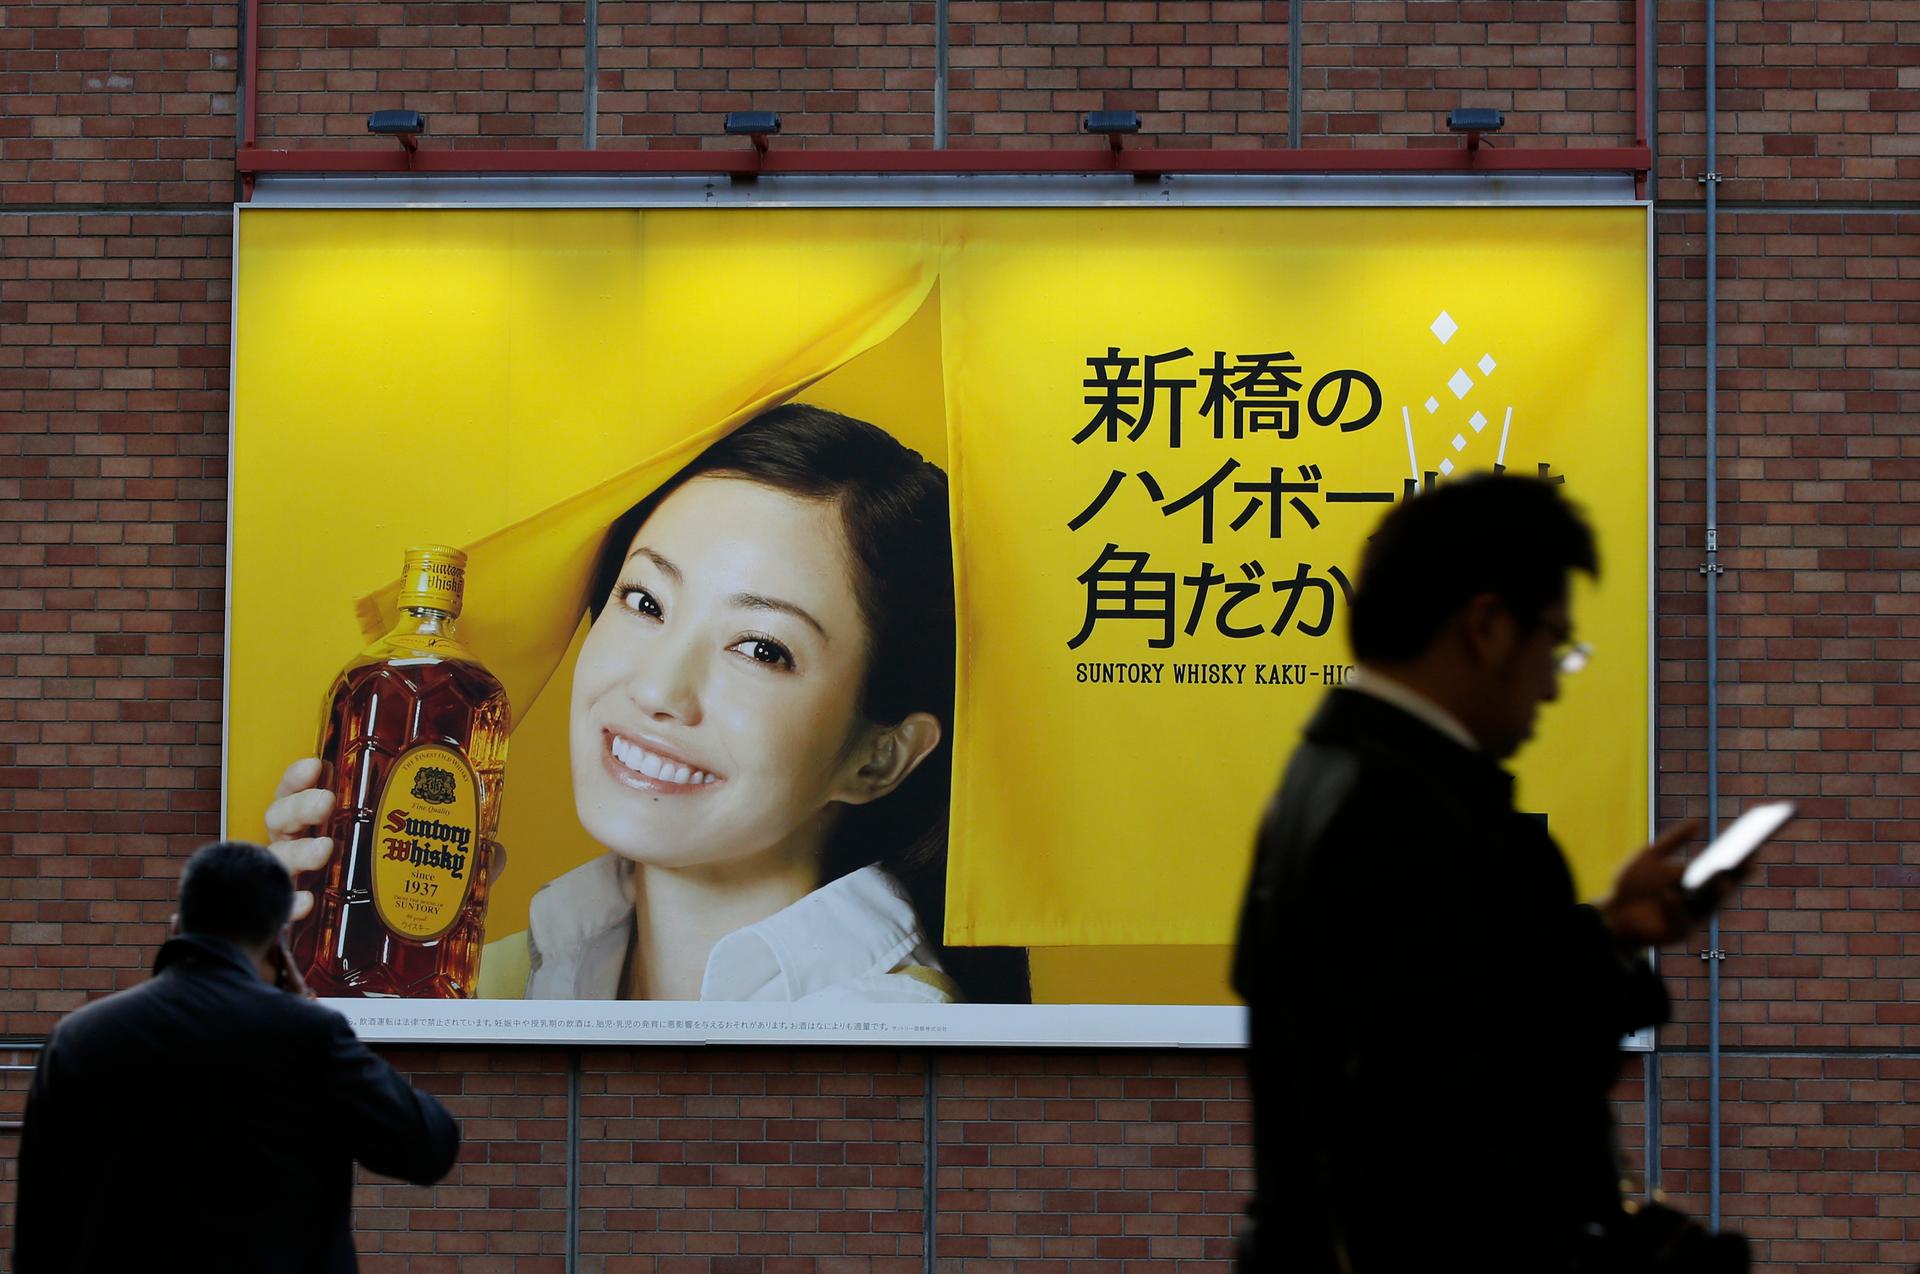 An advertisement for Suntory Holding's Kakubin whisky is displayed at a station in Tokyo on January 14, 2014.